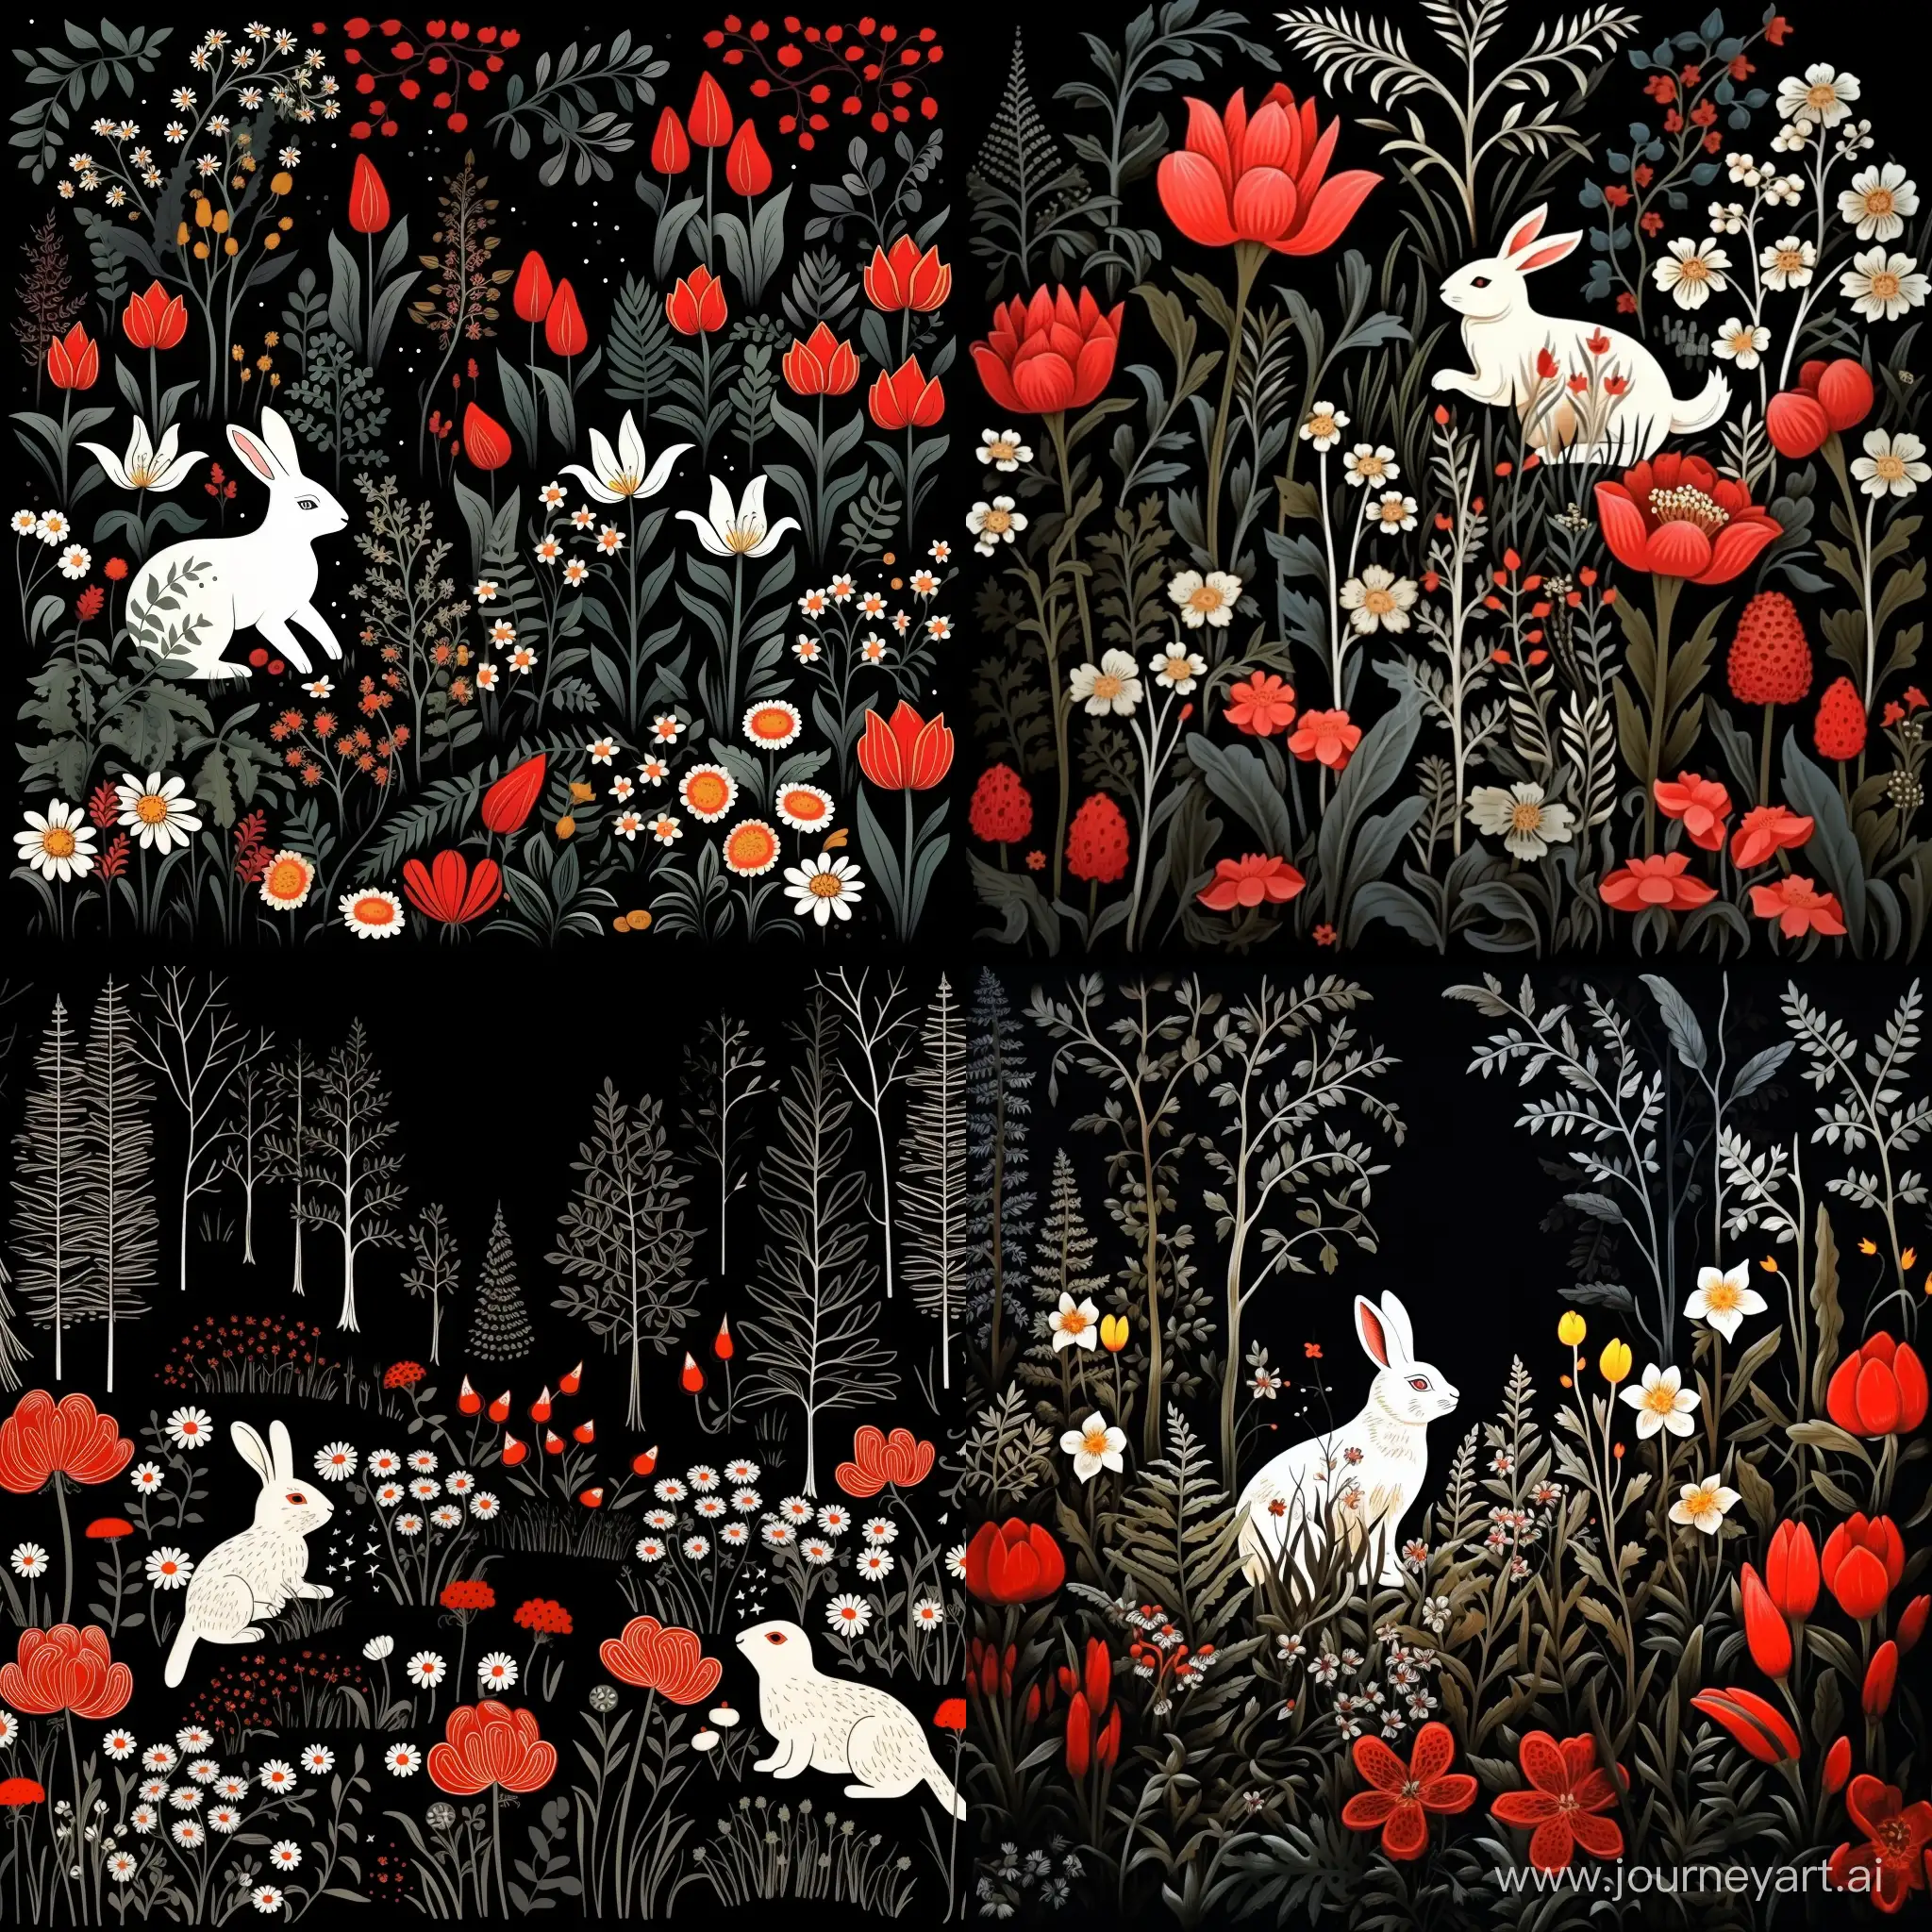 Mysterious-White-Rabbit-Dash-through-Enchanting-Dark-Forest-with-Red-Flora